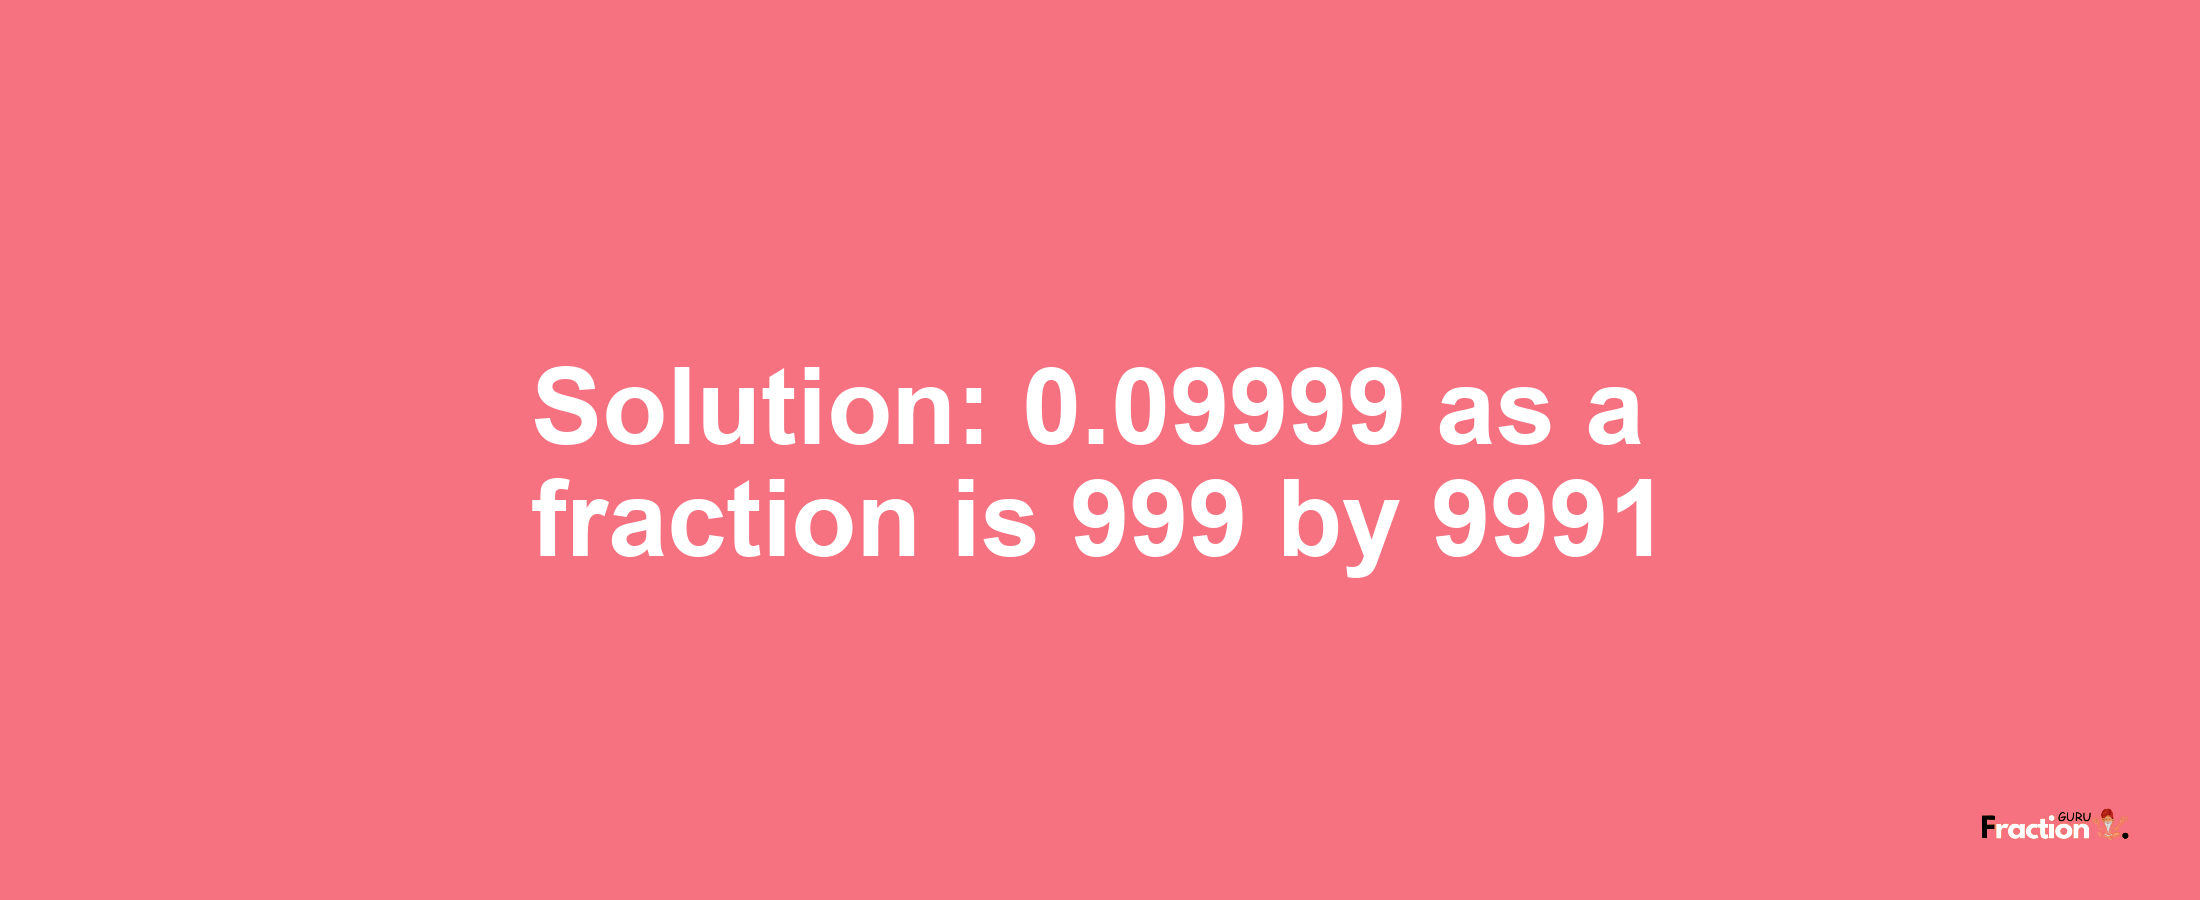 Solution:0.09999 as a fraction is 999/9991